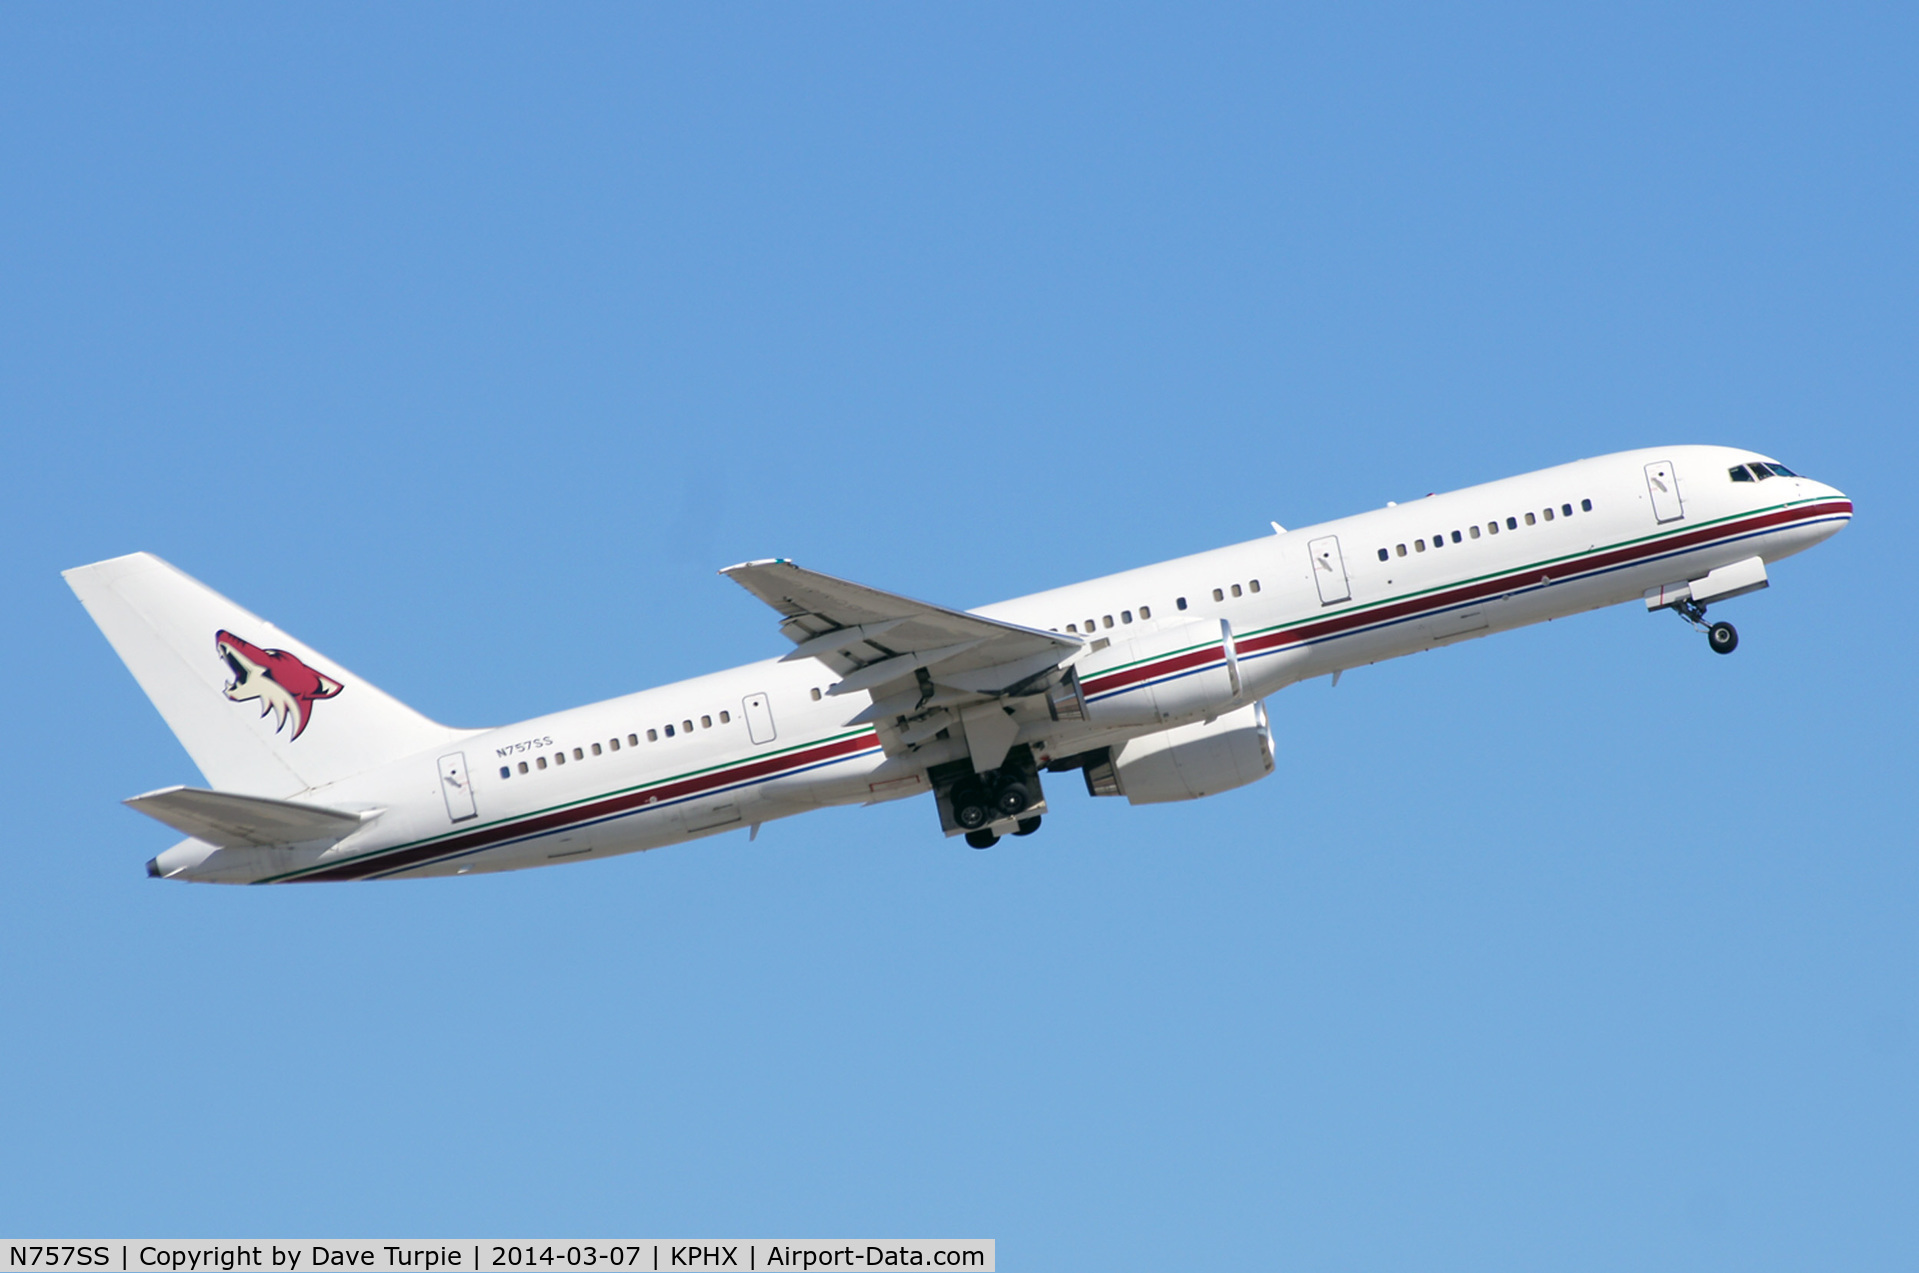 N757SS, 1983 Boeing 757-236 C/N 22176, Used by the Phoenix Coyotes as their team plane.